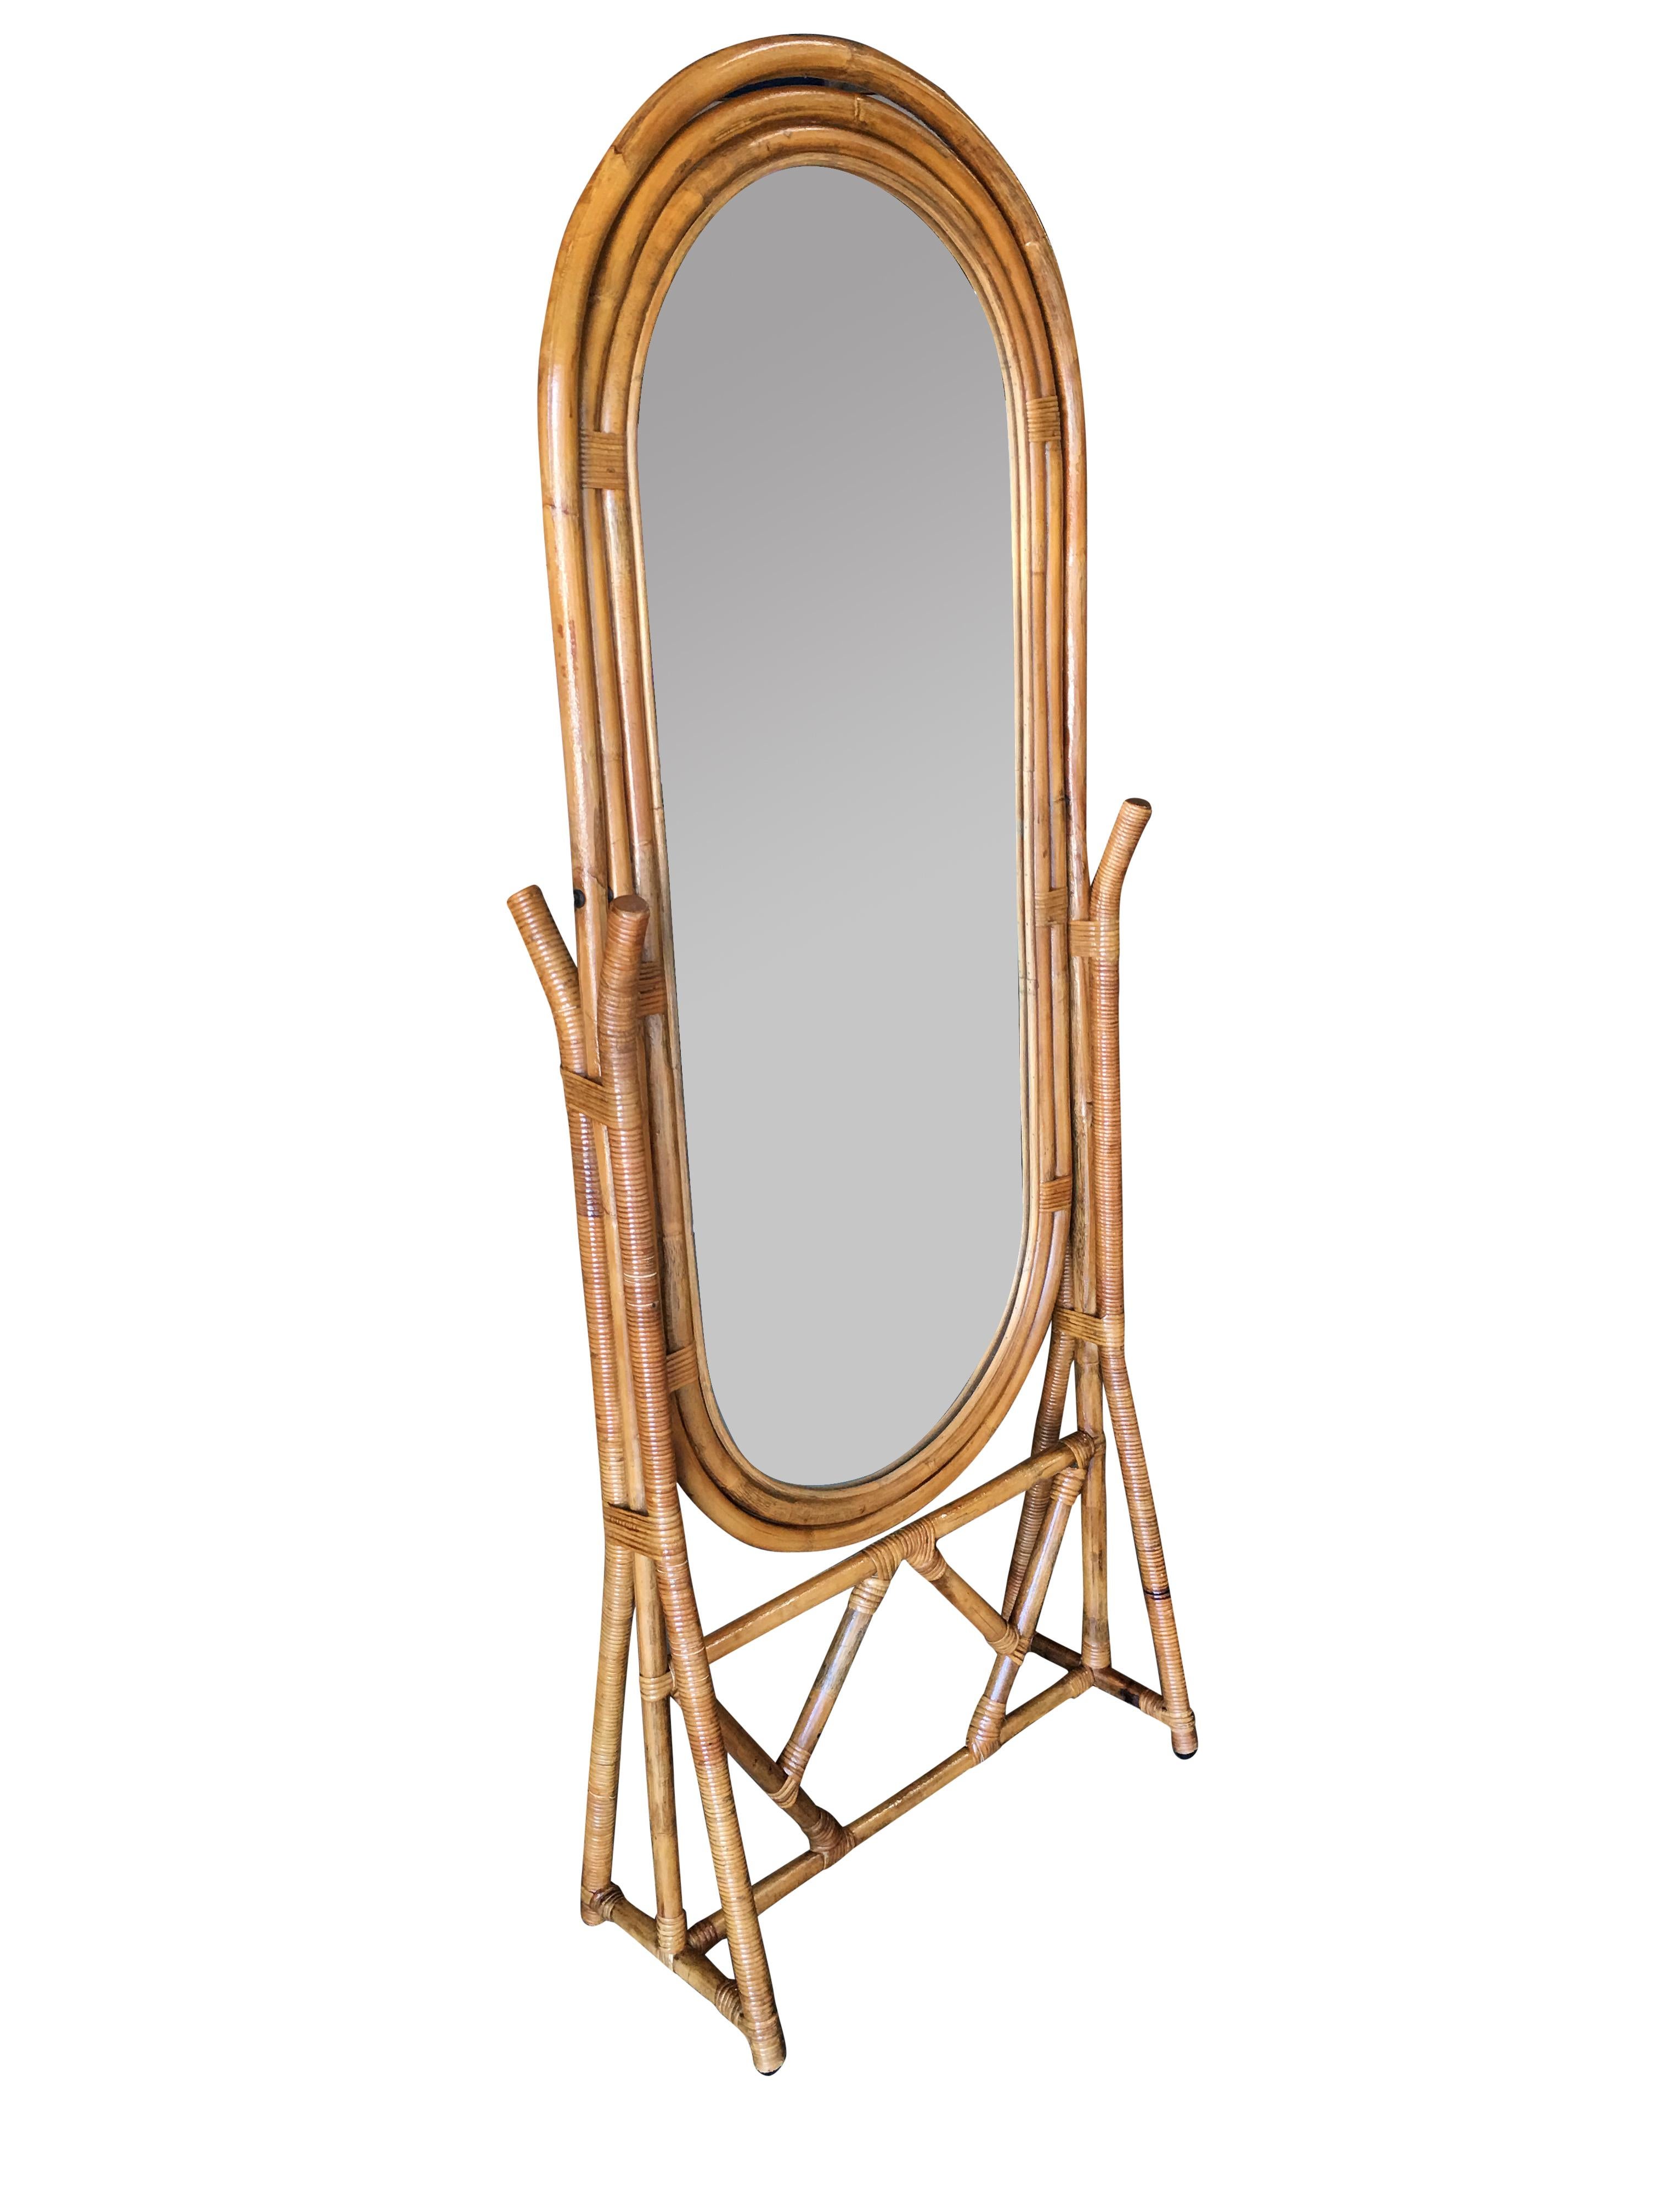 Freestanding full length rattan floor mirror by Interlude Home Inc with decorative wood back, bronze fixtures and fancy wicker wrappings, 

circa 1980.

Designed in the manner of Paul Frankl.

Restored to new for you.

All rattan, bamboo and wicker